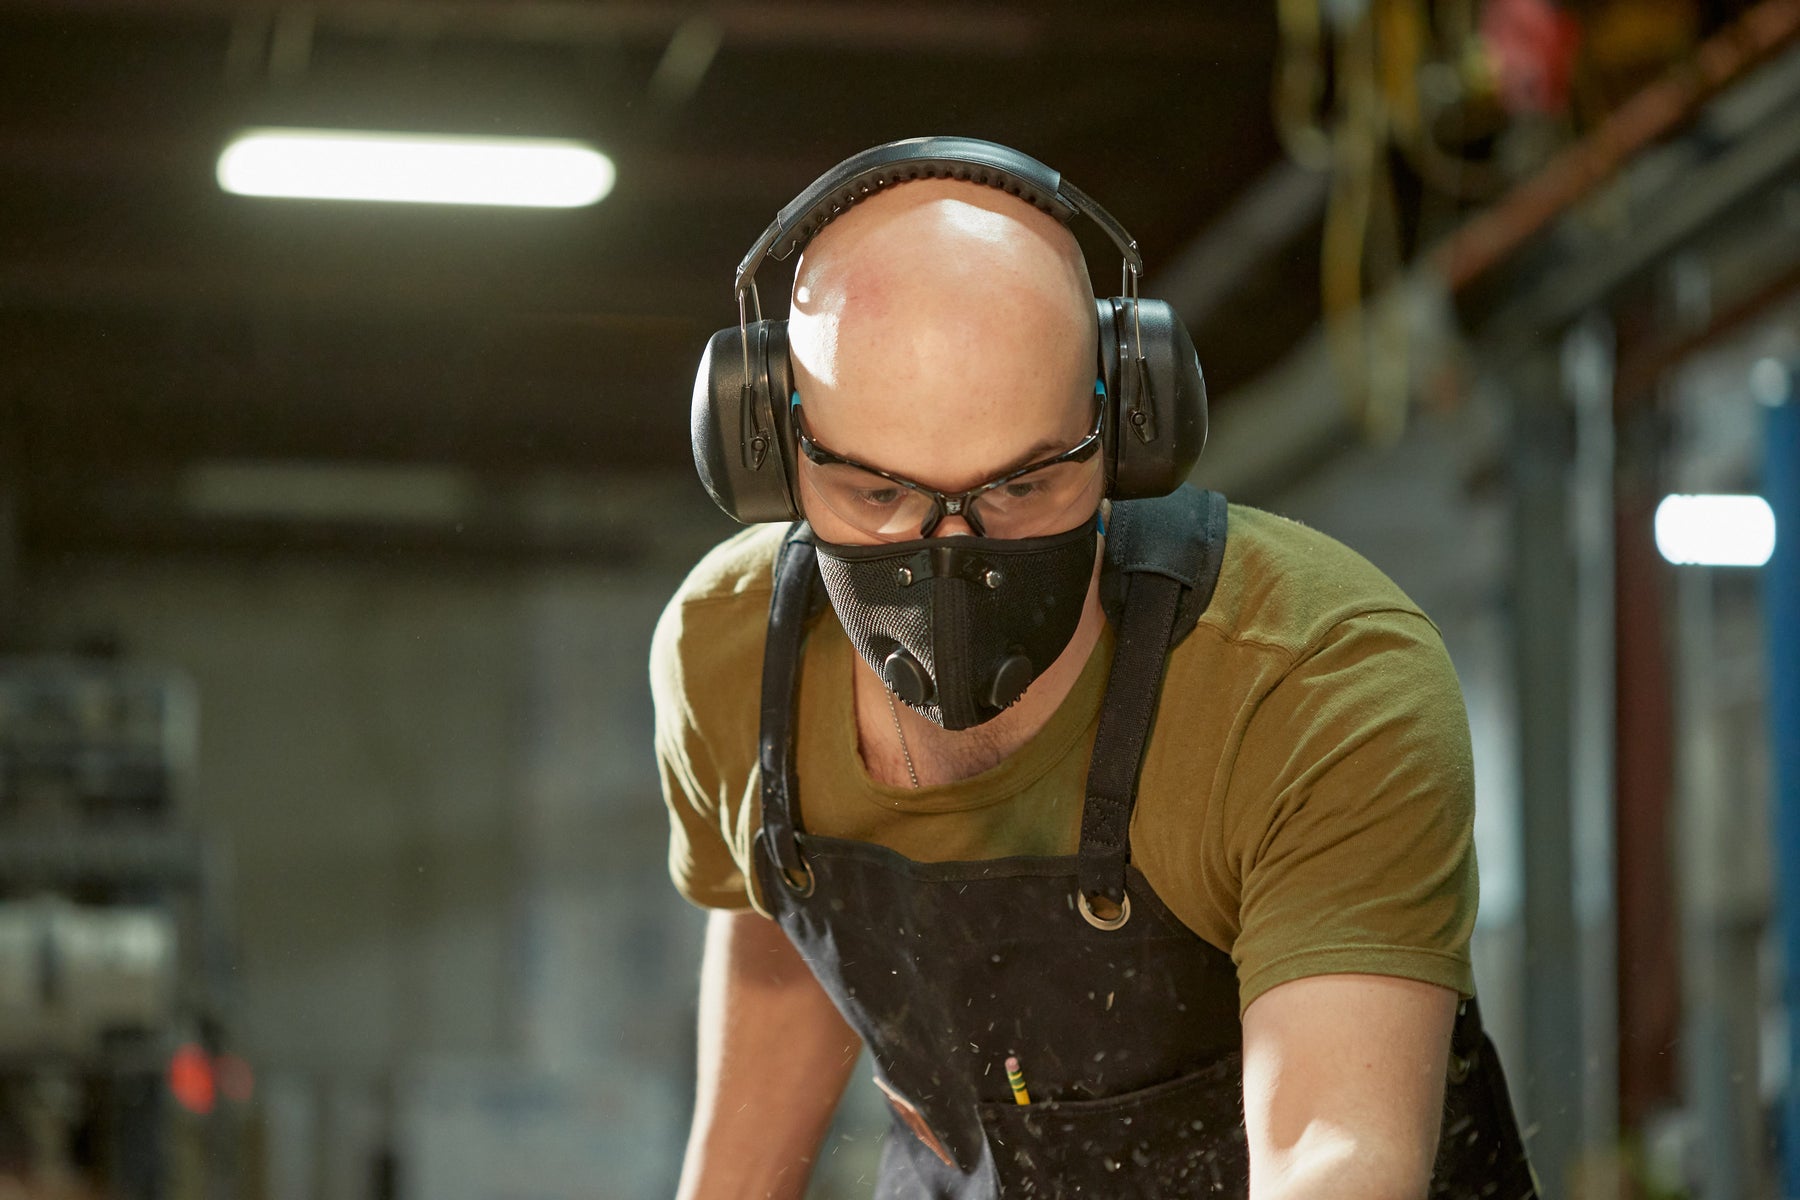 A woodworker stands in a wood shop wearing an RZ Mask M2 Black Dust Mask for protection against dust, sawdust and other particulates while working on projects. He also wears RZ Earmuffs and Safety Glasses, along with an RZ Apron.